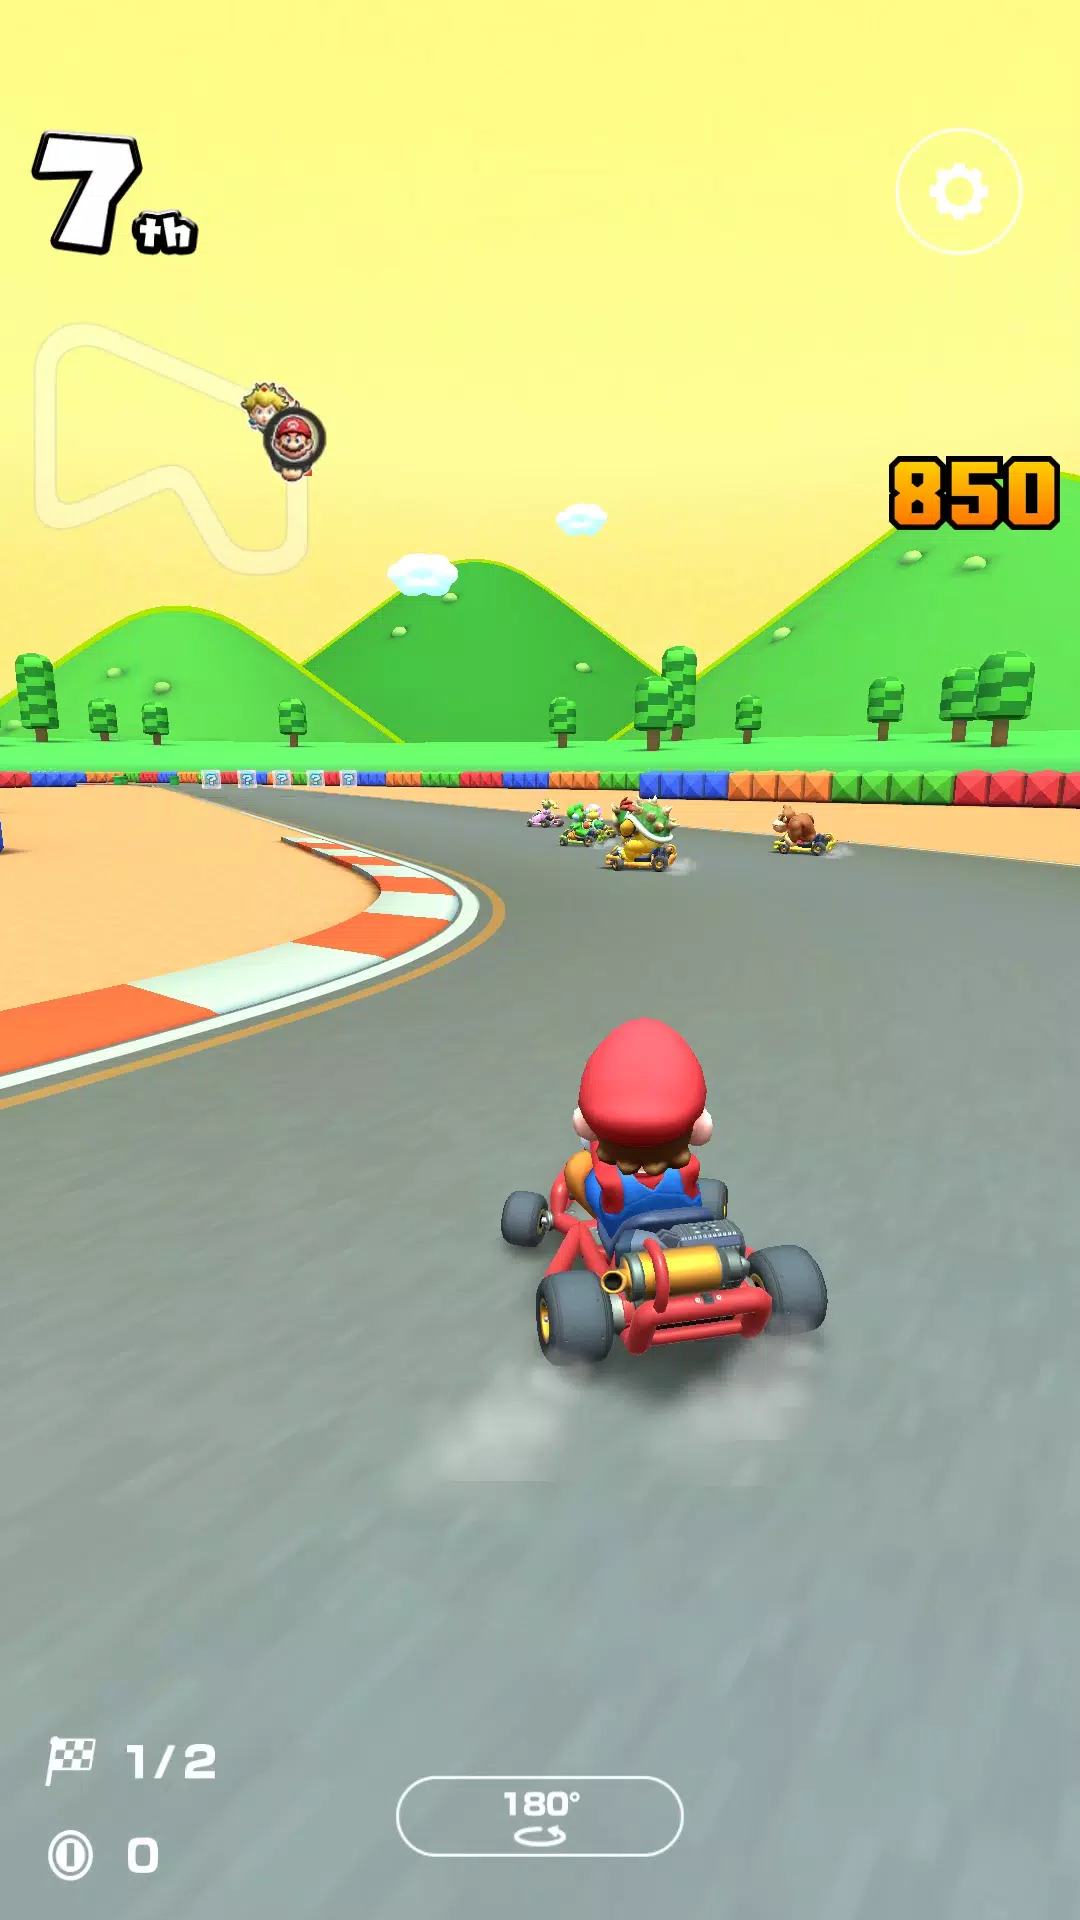 Download Mario Kart Tour Apk for Android v2.0.0